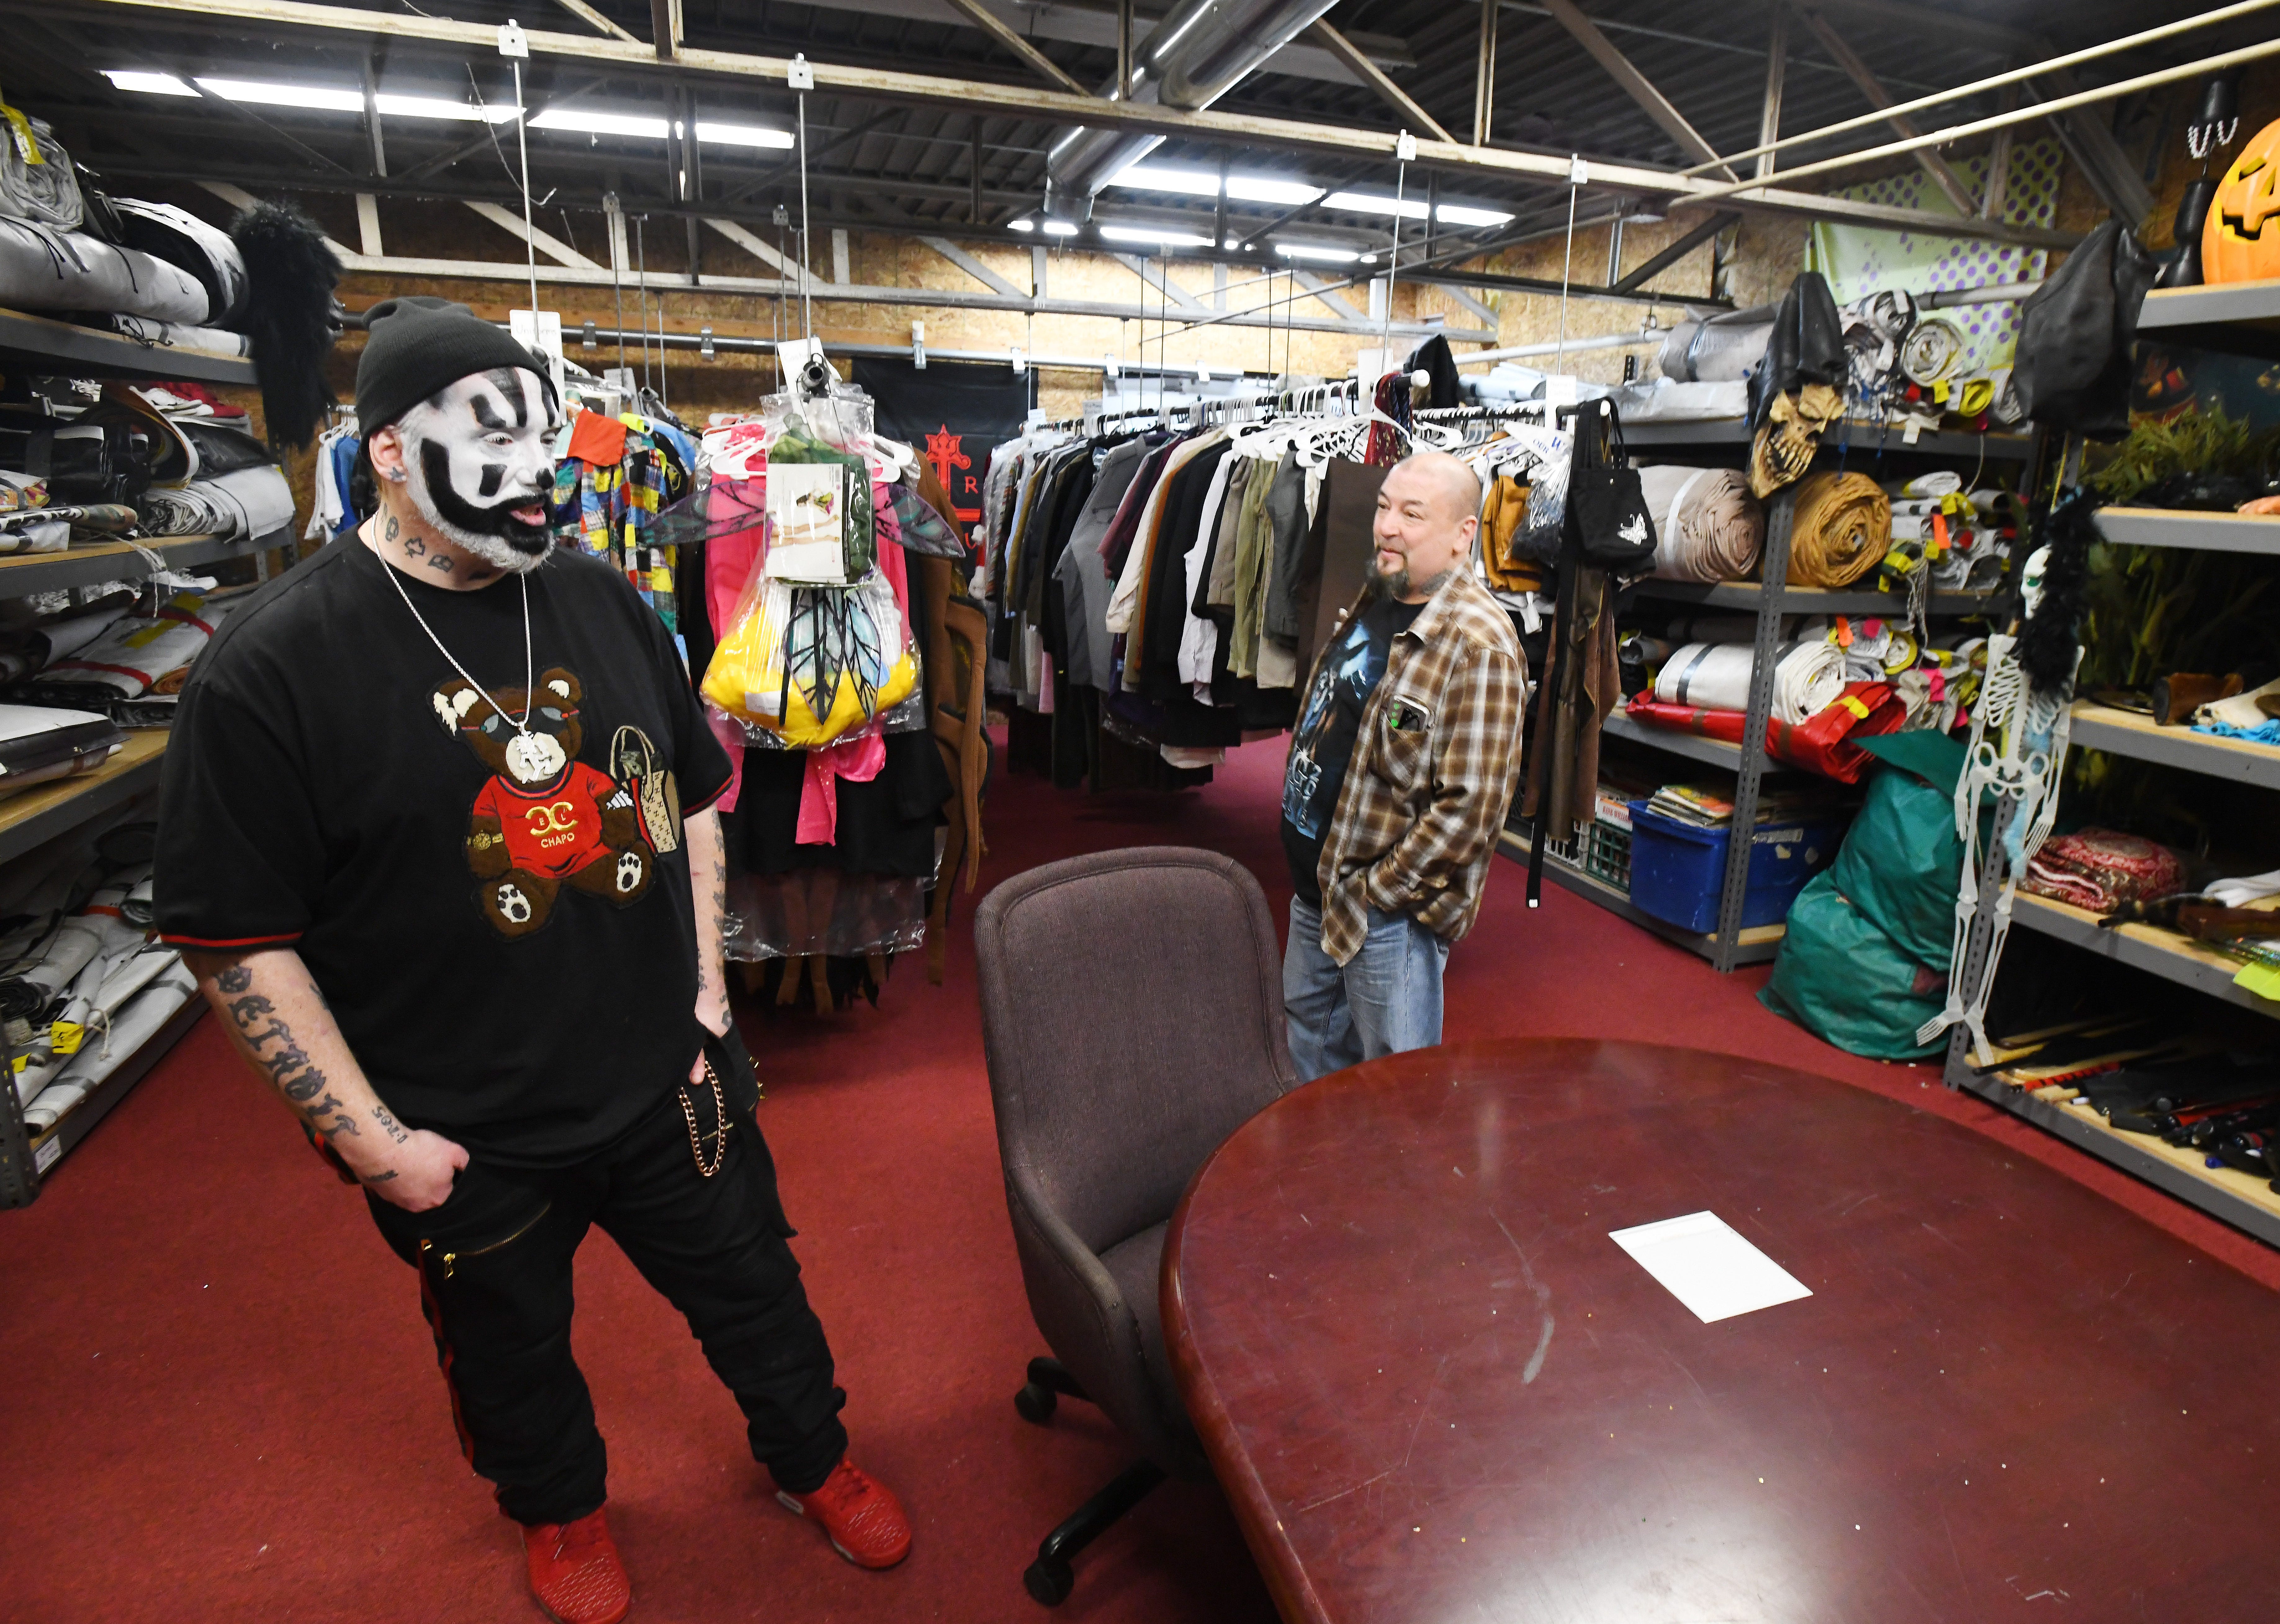 Violent J, aka Joseph Bruce of Insane Clown Posse, with Rudy "Rude Boy" Hill shows off costume storage where outfits and various paraphernalia are stored from their elaborate shows and tours.